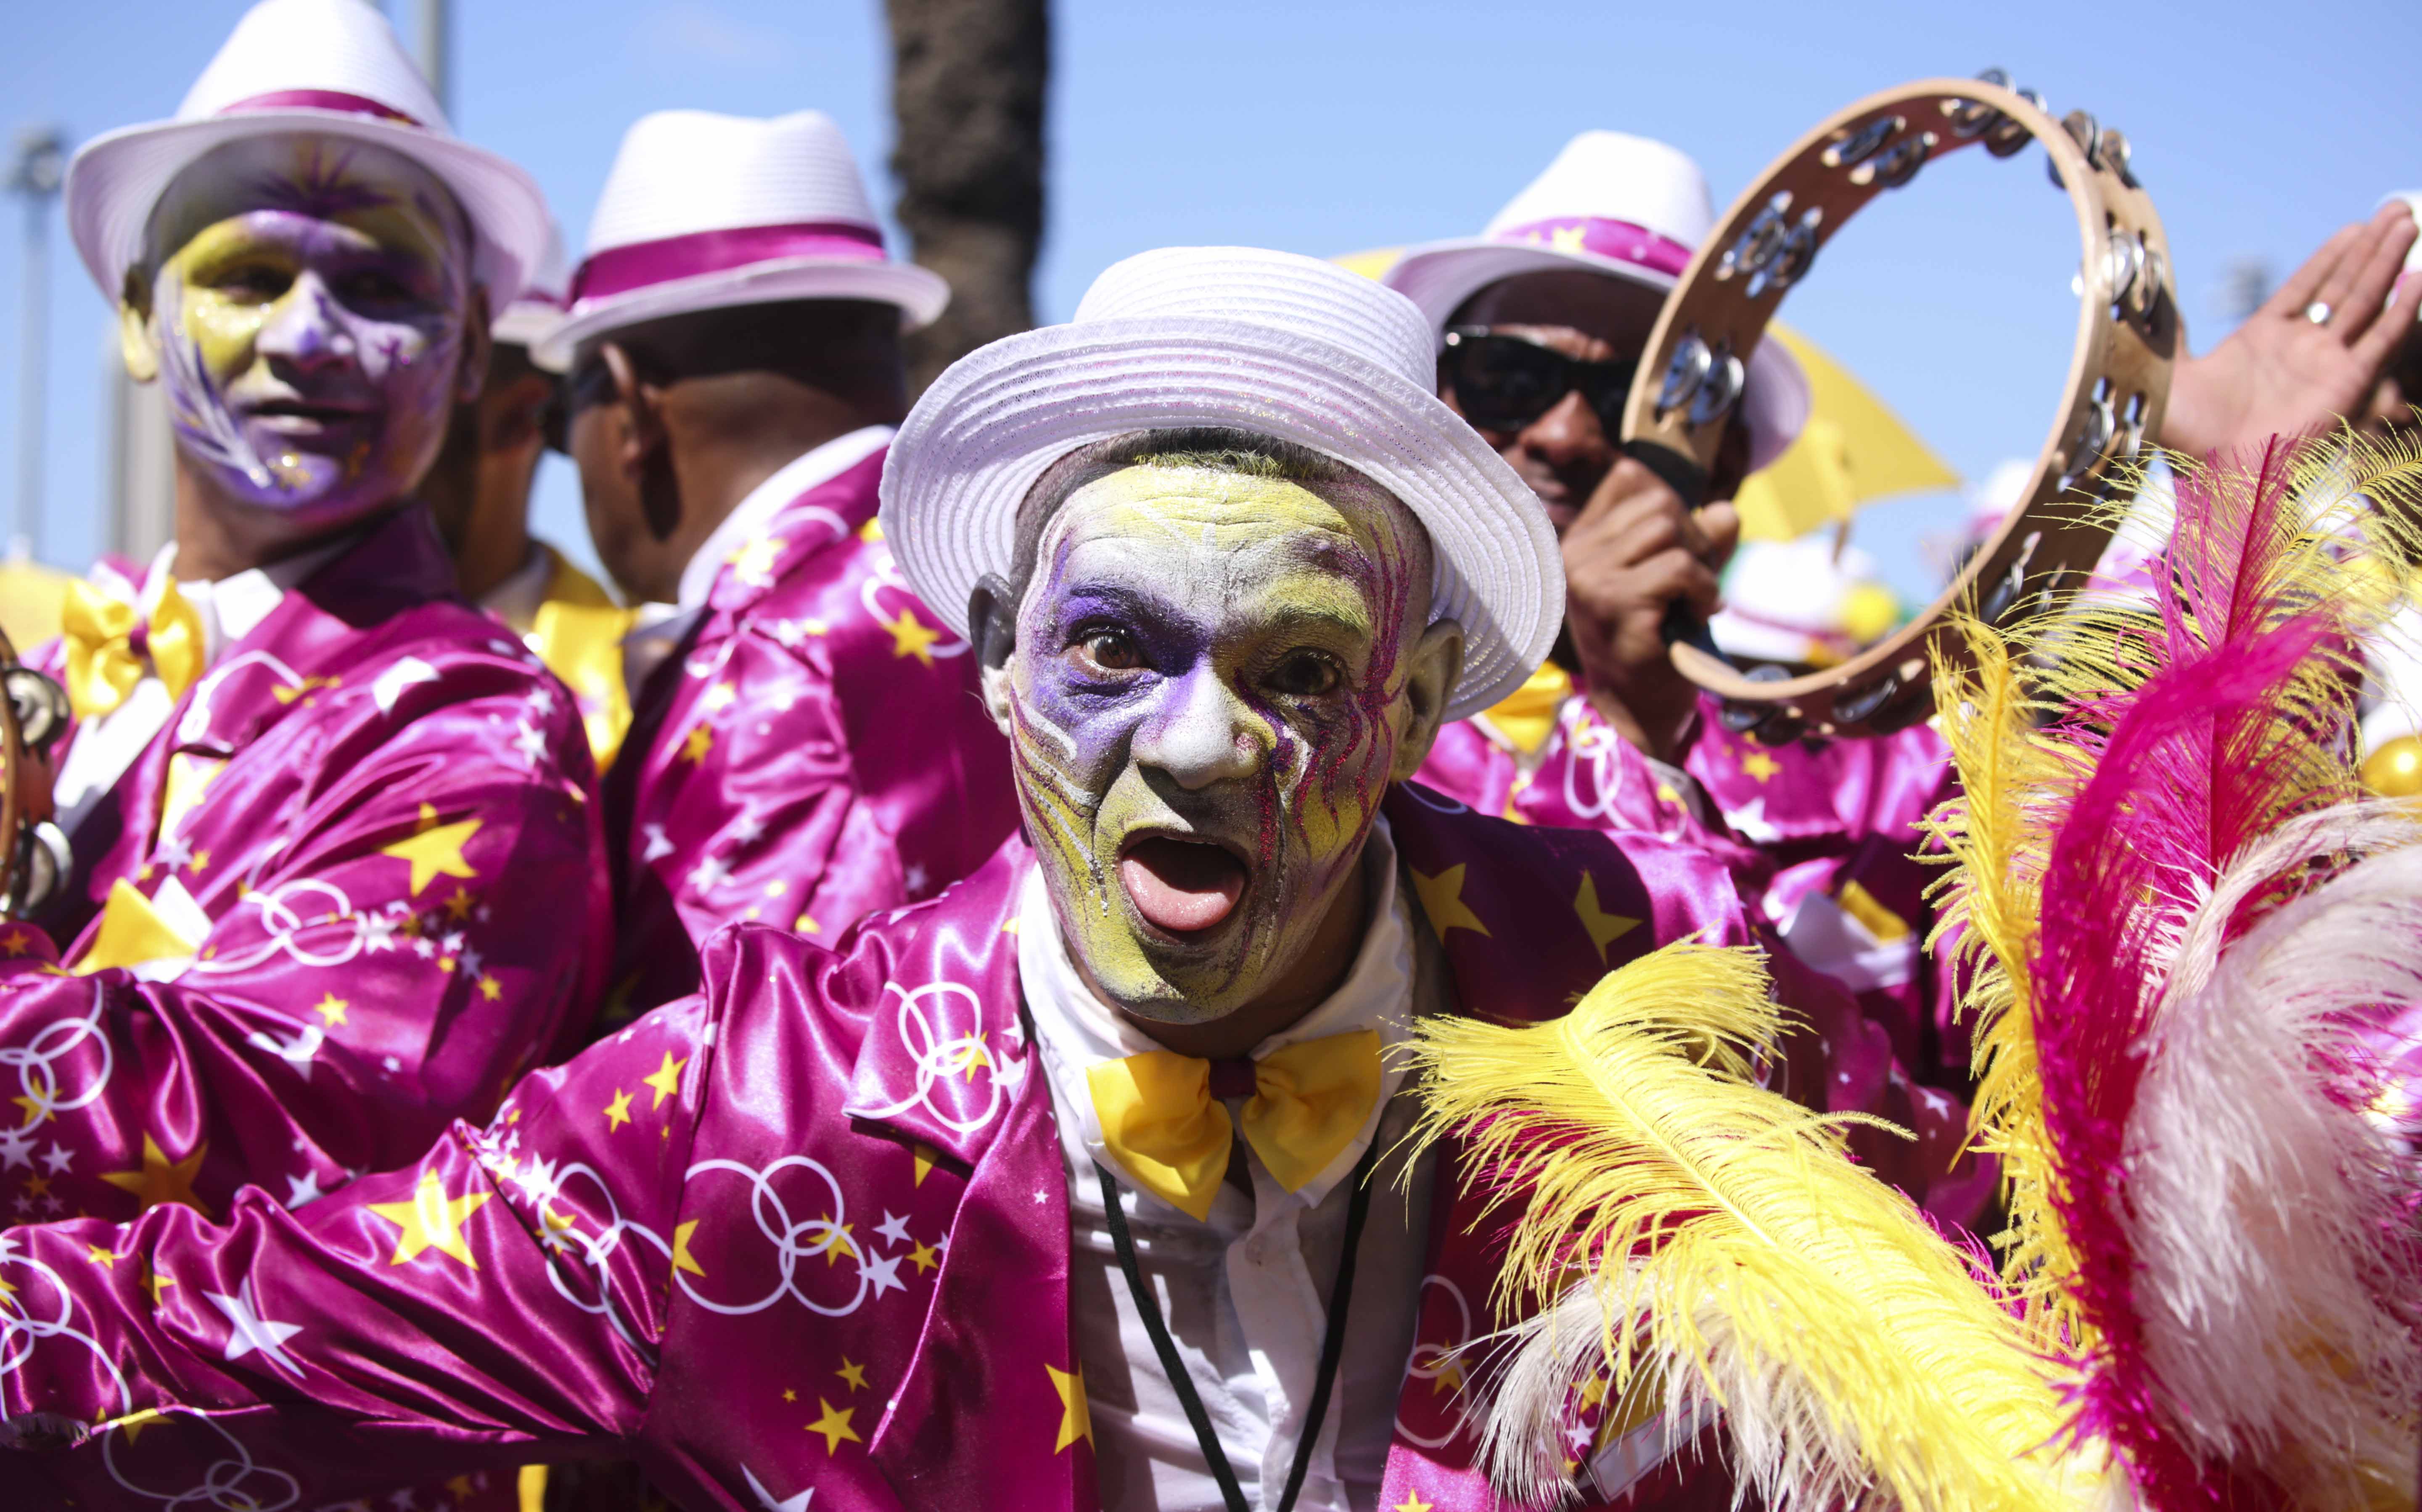 [WATCH] Thousands Celebrate New Year at Cape Town Minstrel Parade